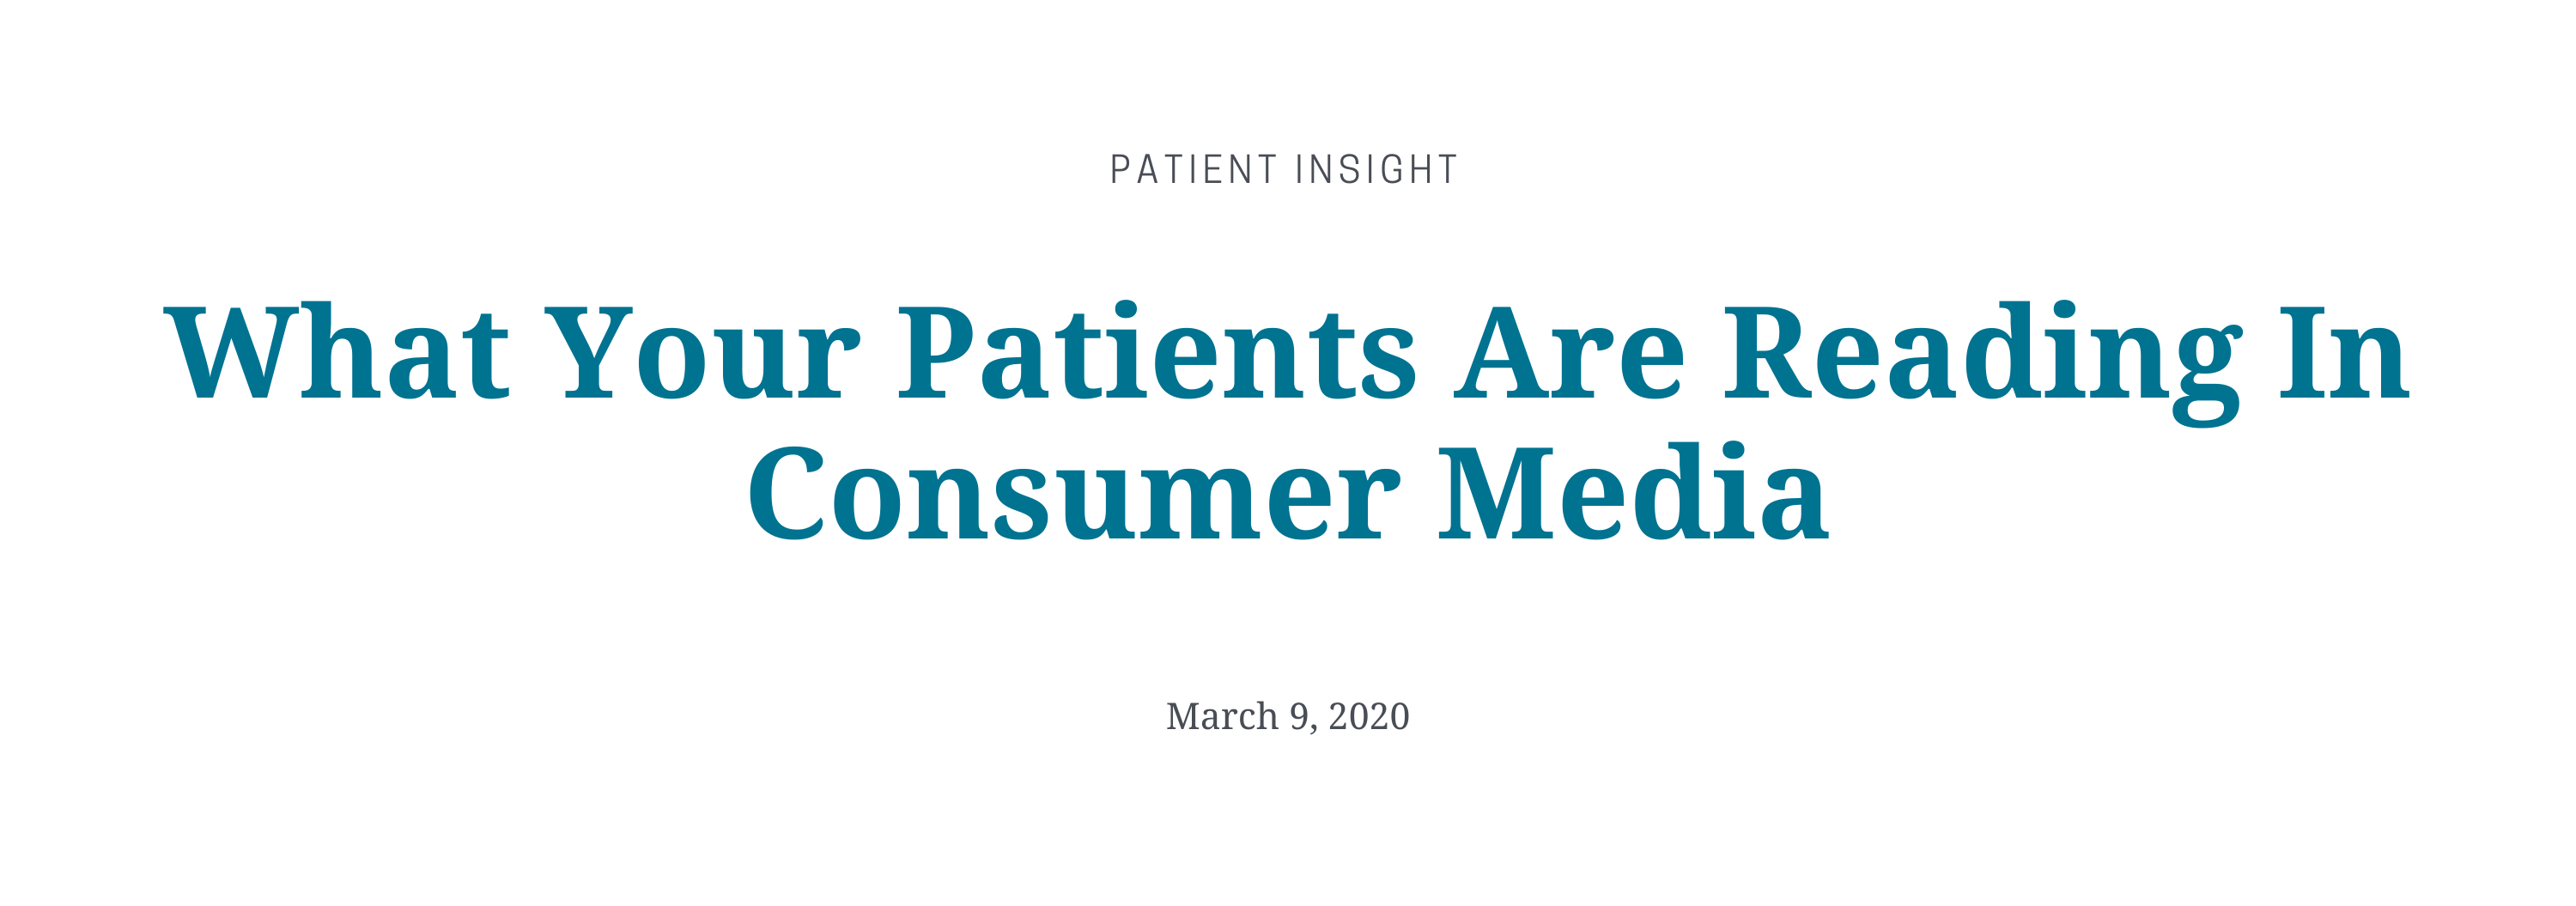 Patient Insights March 9, 2020